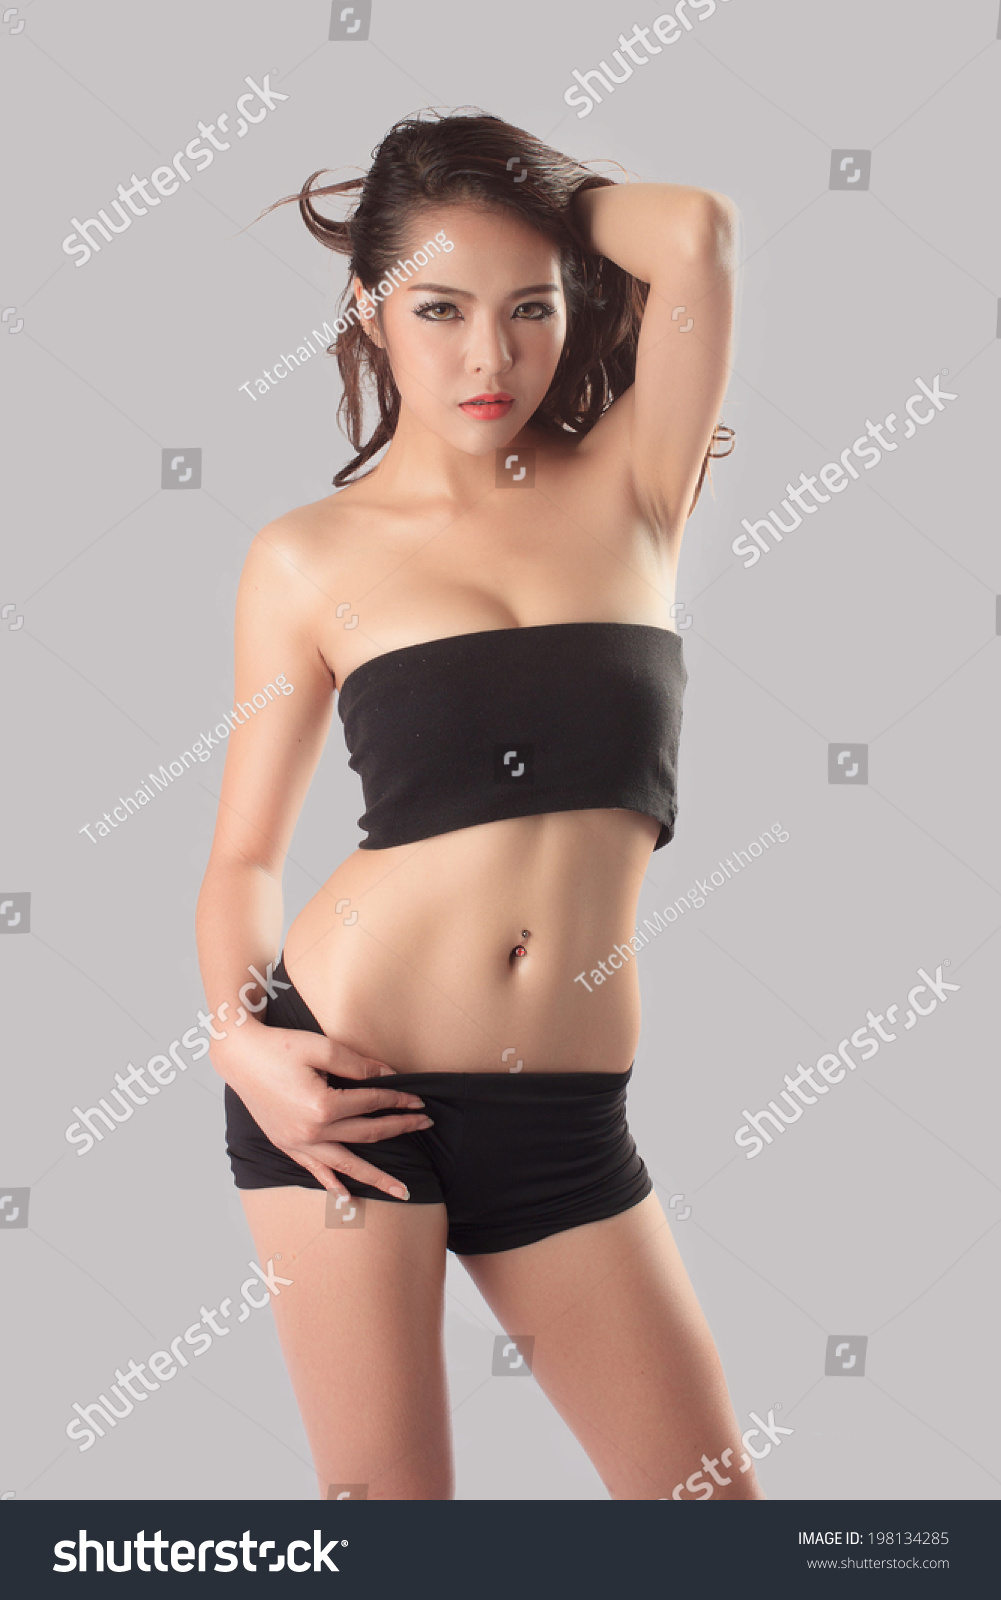 Sexy Young Woman Post Studio Stock